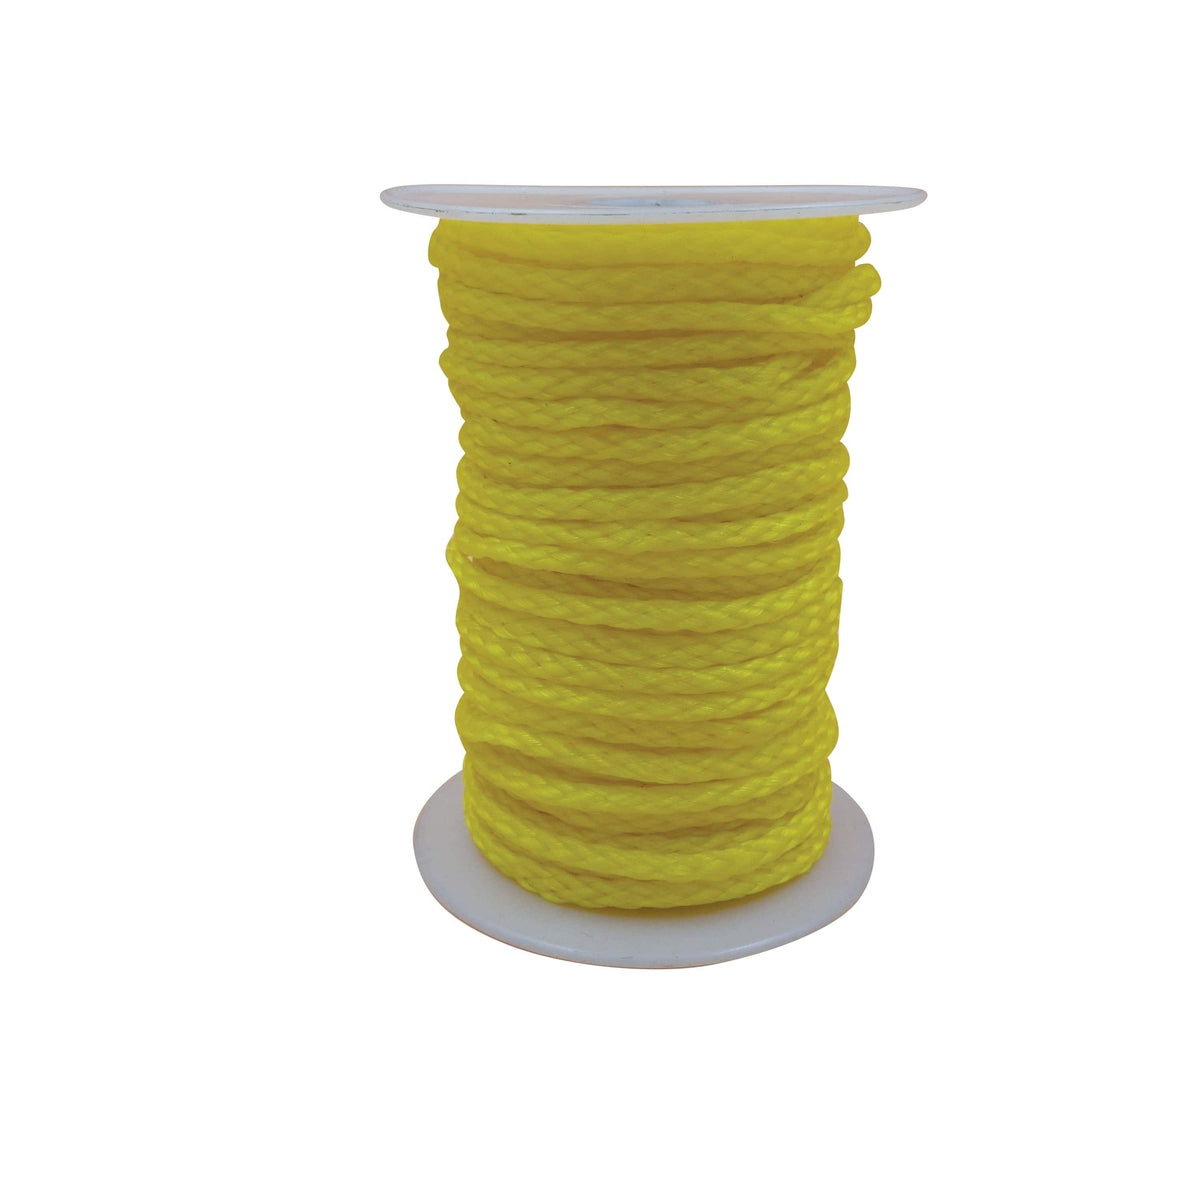 Extreme Max Hollow Braid Rope 5/16" 600' Yellow #3006.2231